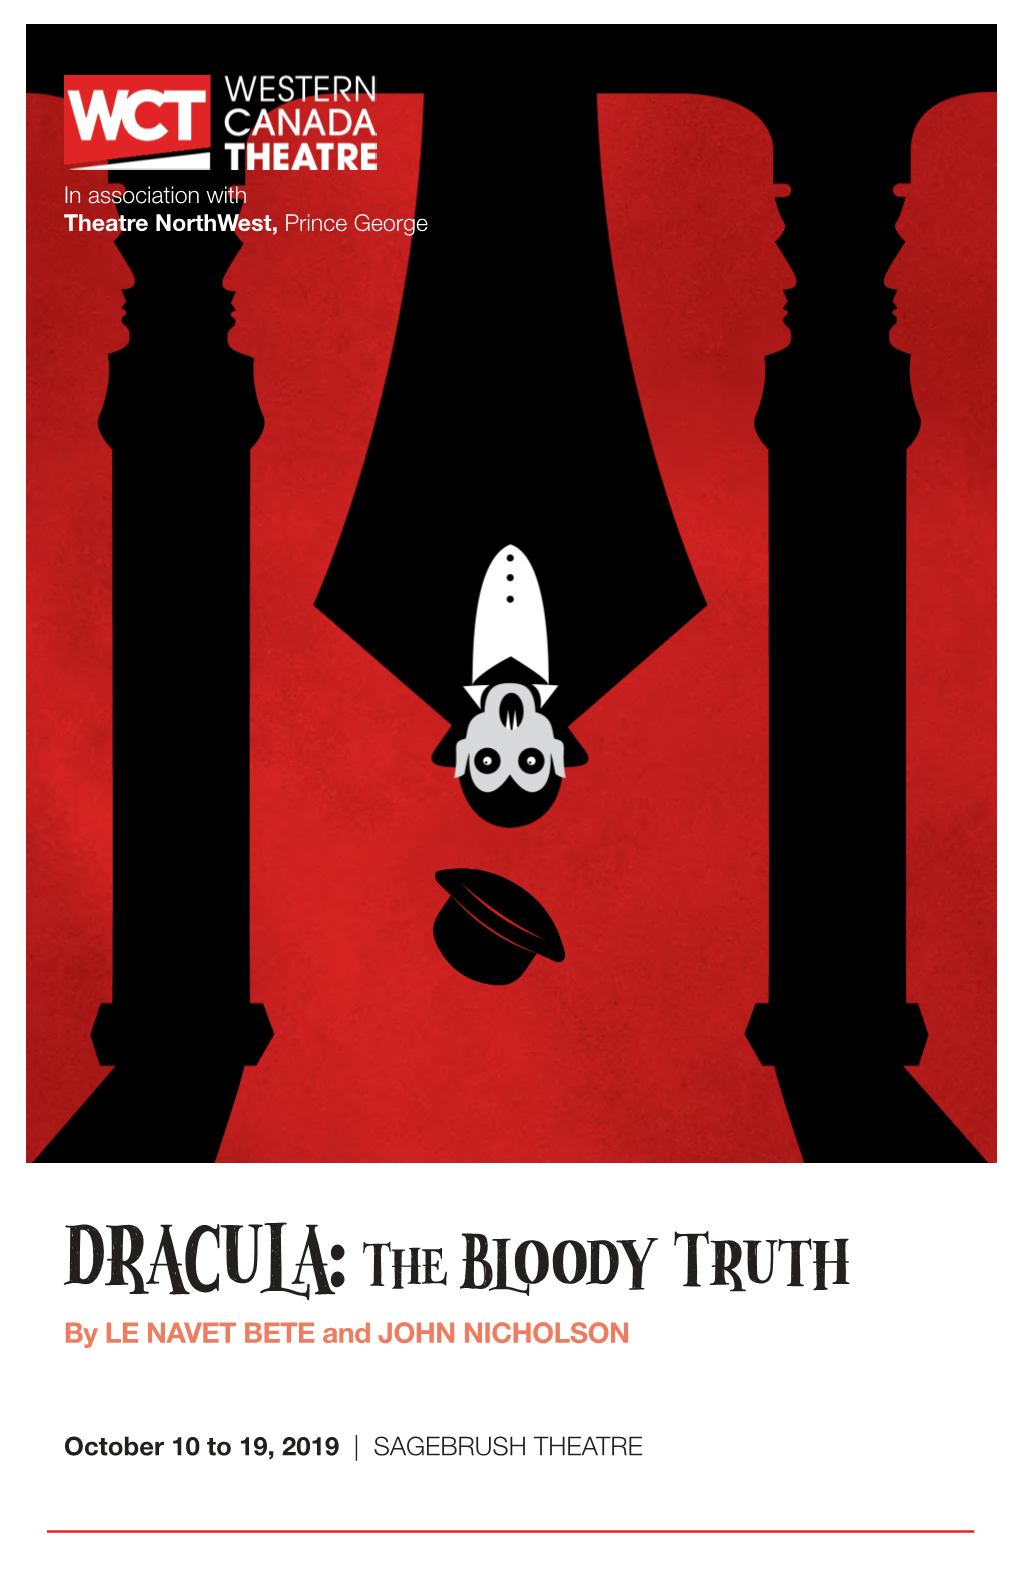 DRACULA: the Bloody Truth by LE NAVET BETE and JOHN NICHOLSON